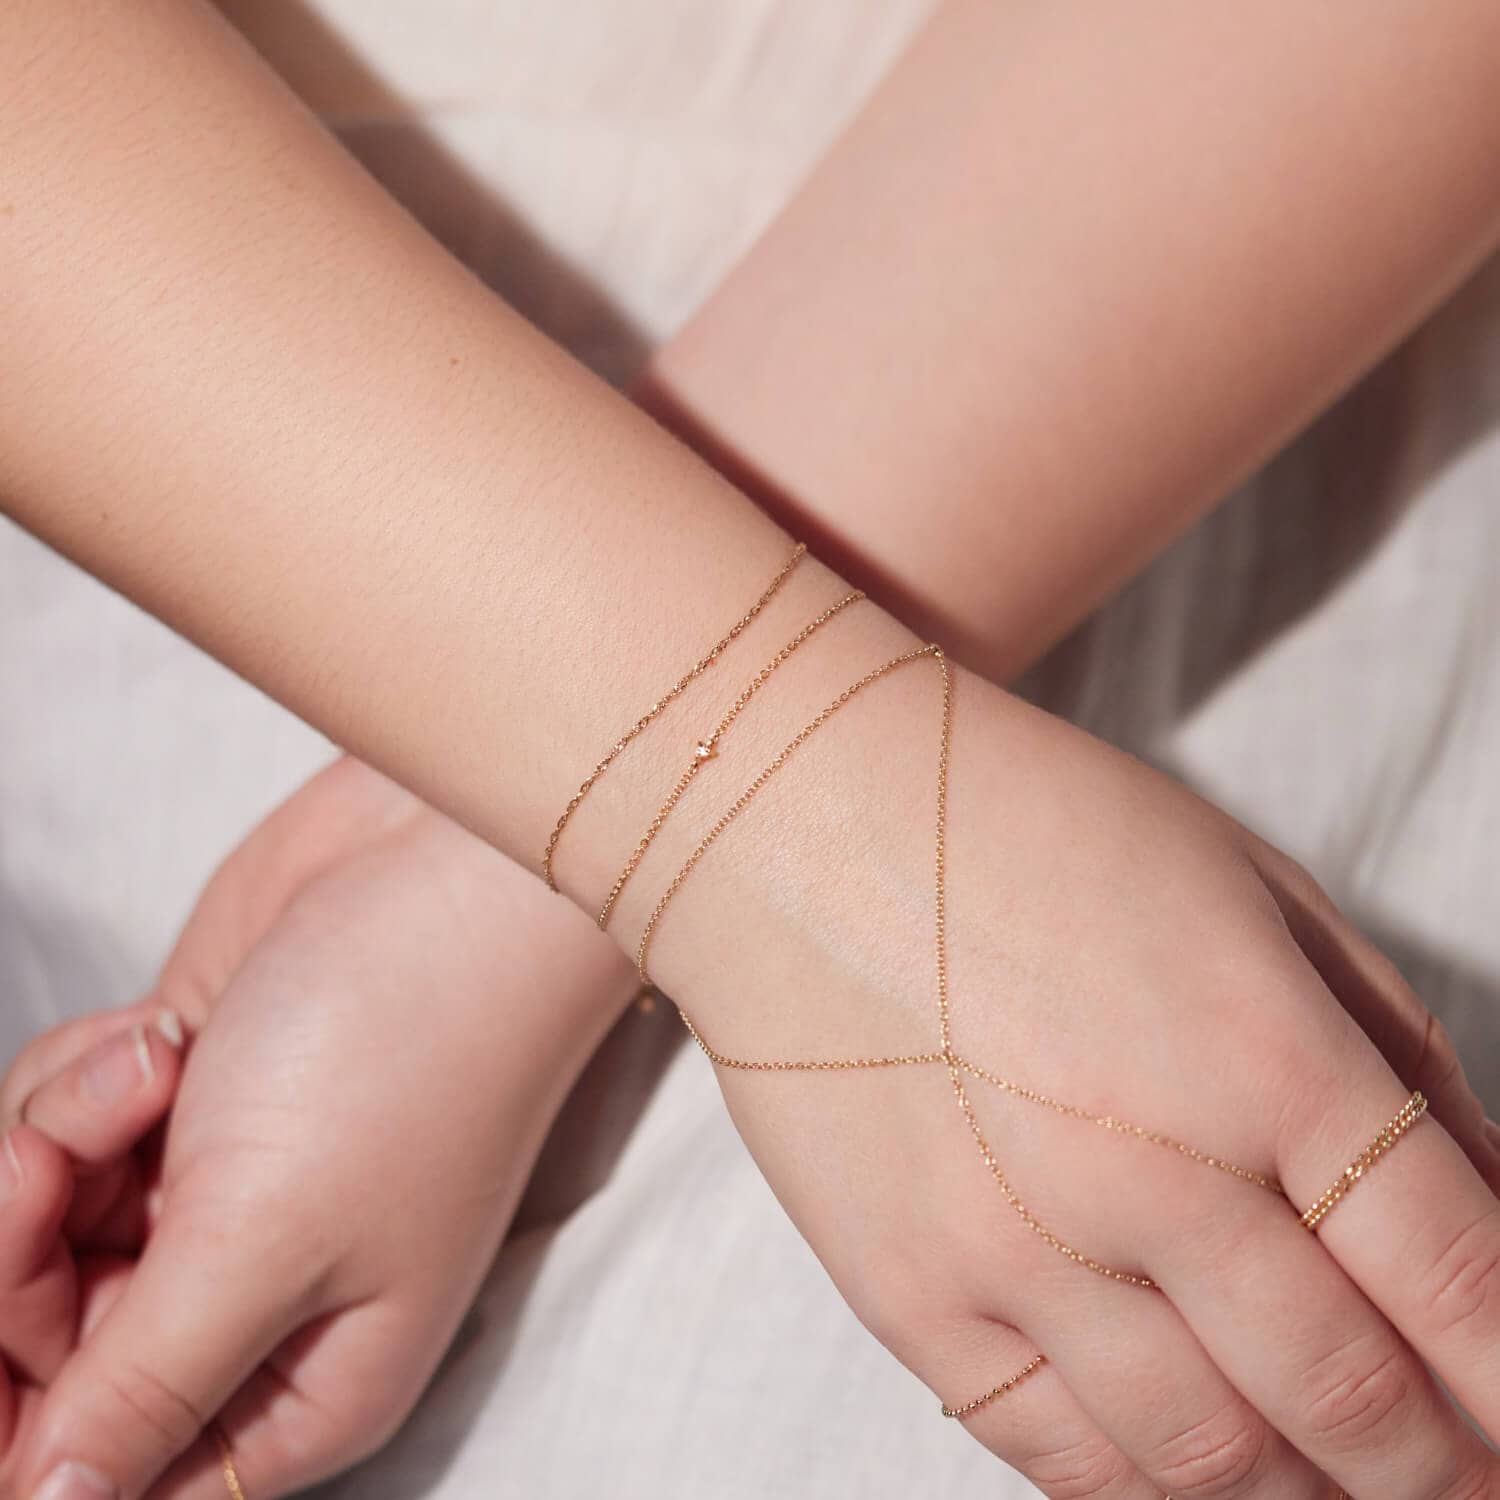 What It Was Like Getting Permanent Jewelry Welded Onto My Wrist